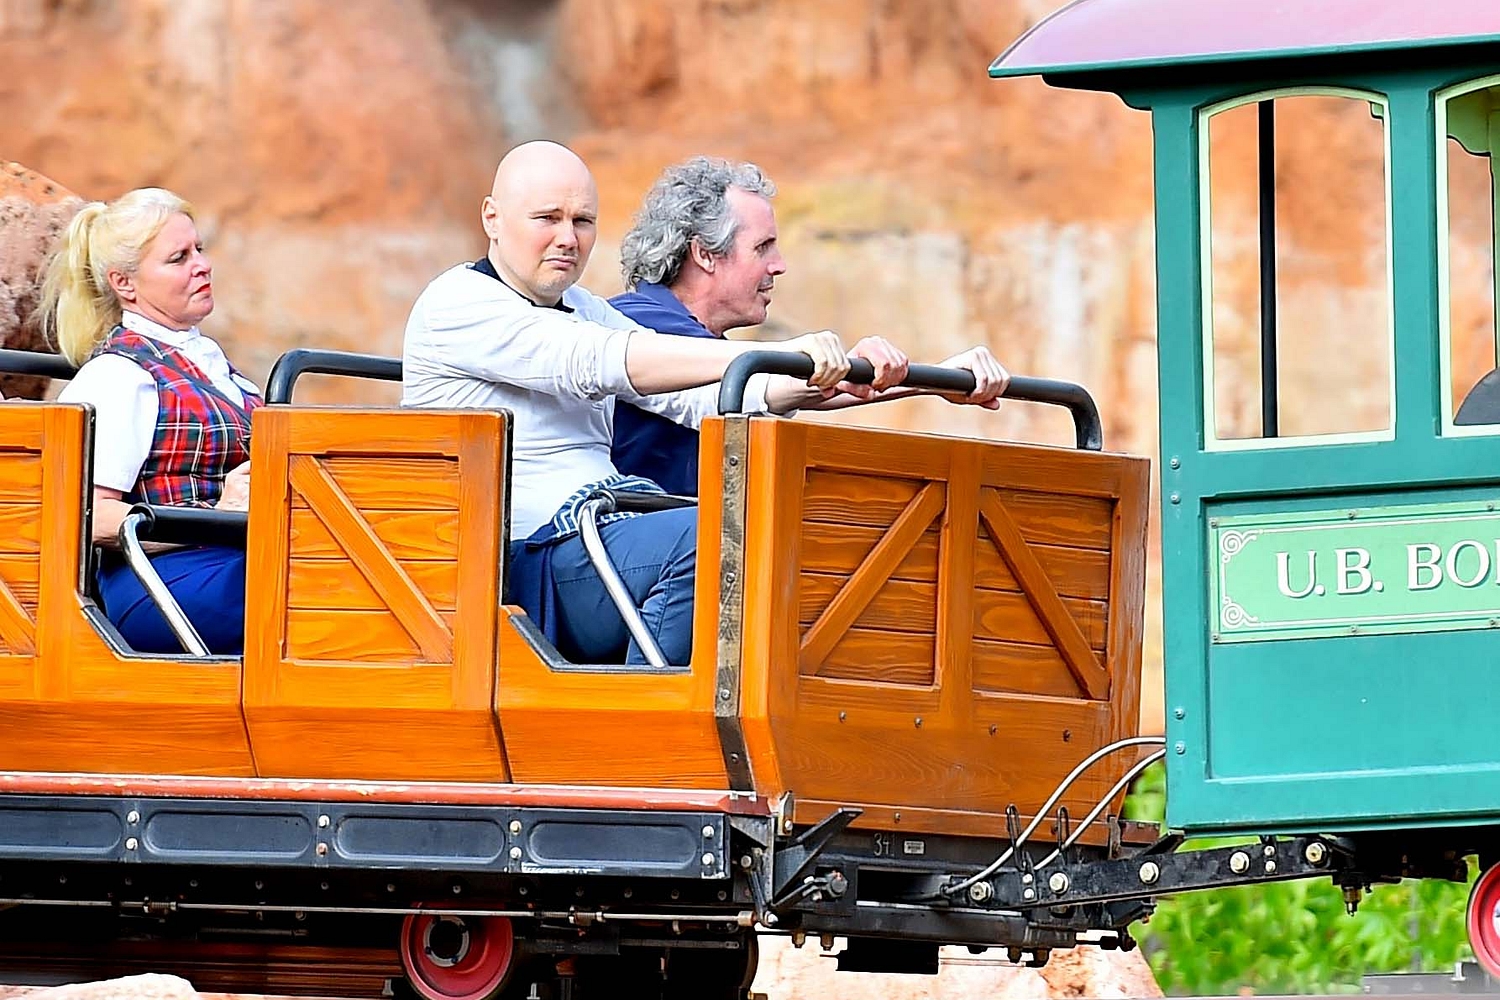 Billy Corgan recounts Disneyland trip: “I’m like, what the fuck do you want from me?”